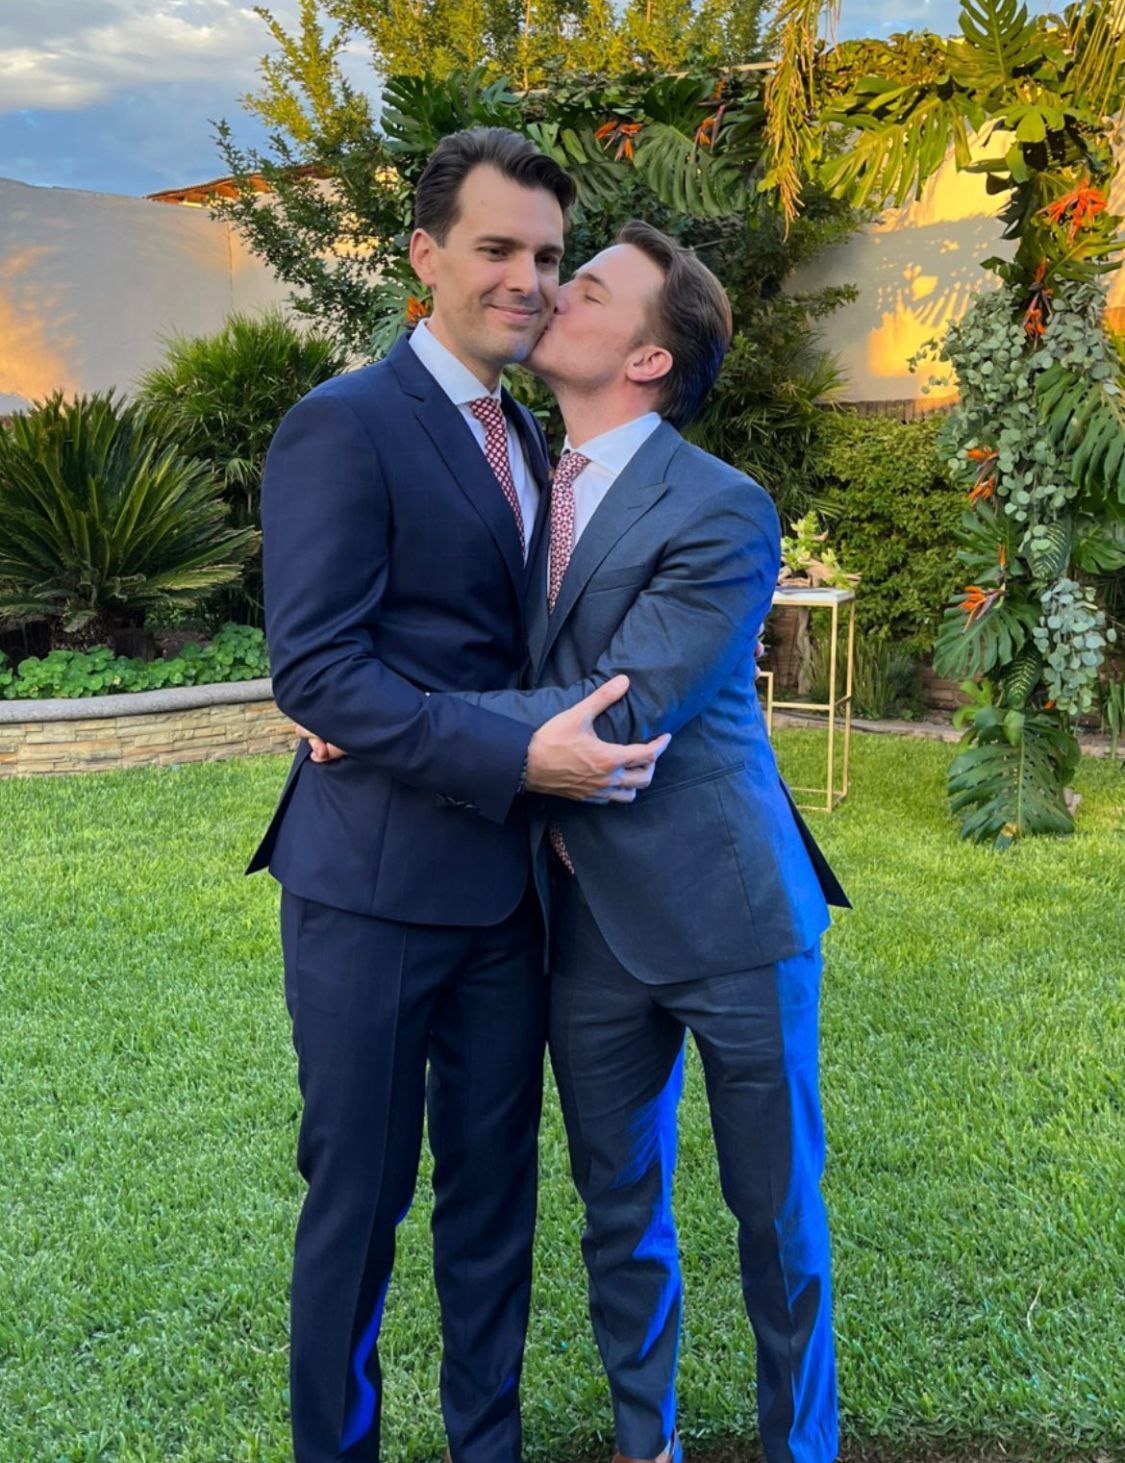 René Strickler celebrated the LGBT+ wedding of his first-born: “Today I welcomed another child into the family” - Infobae